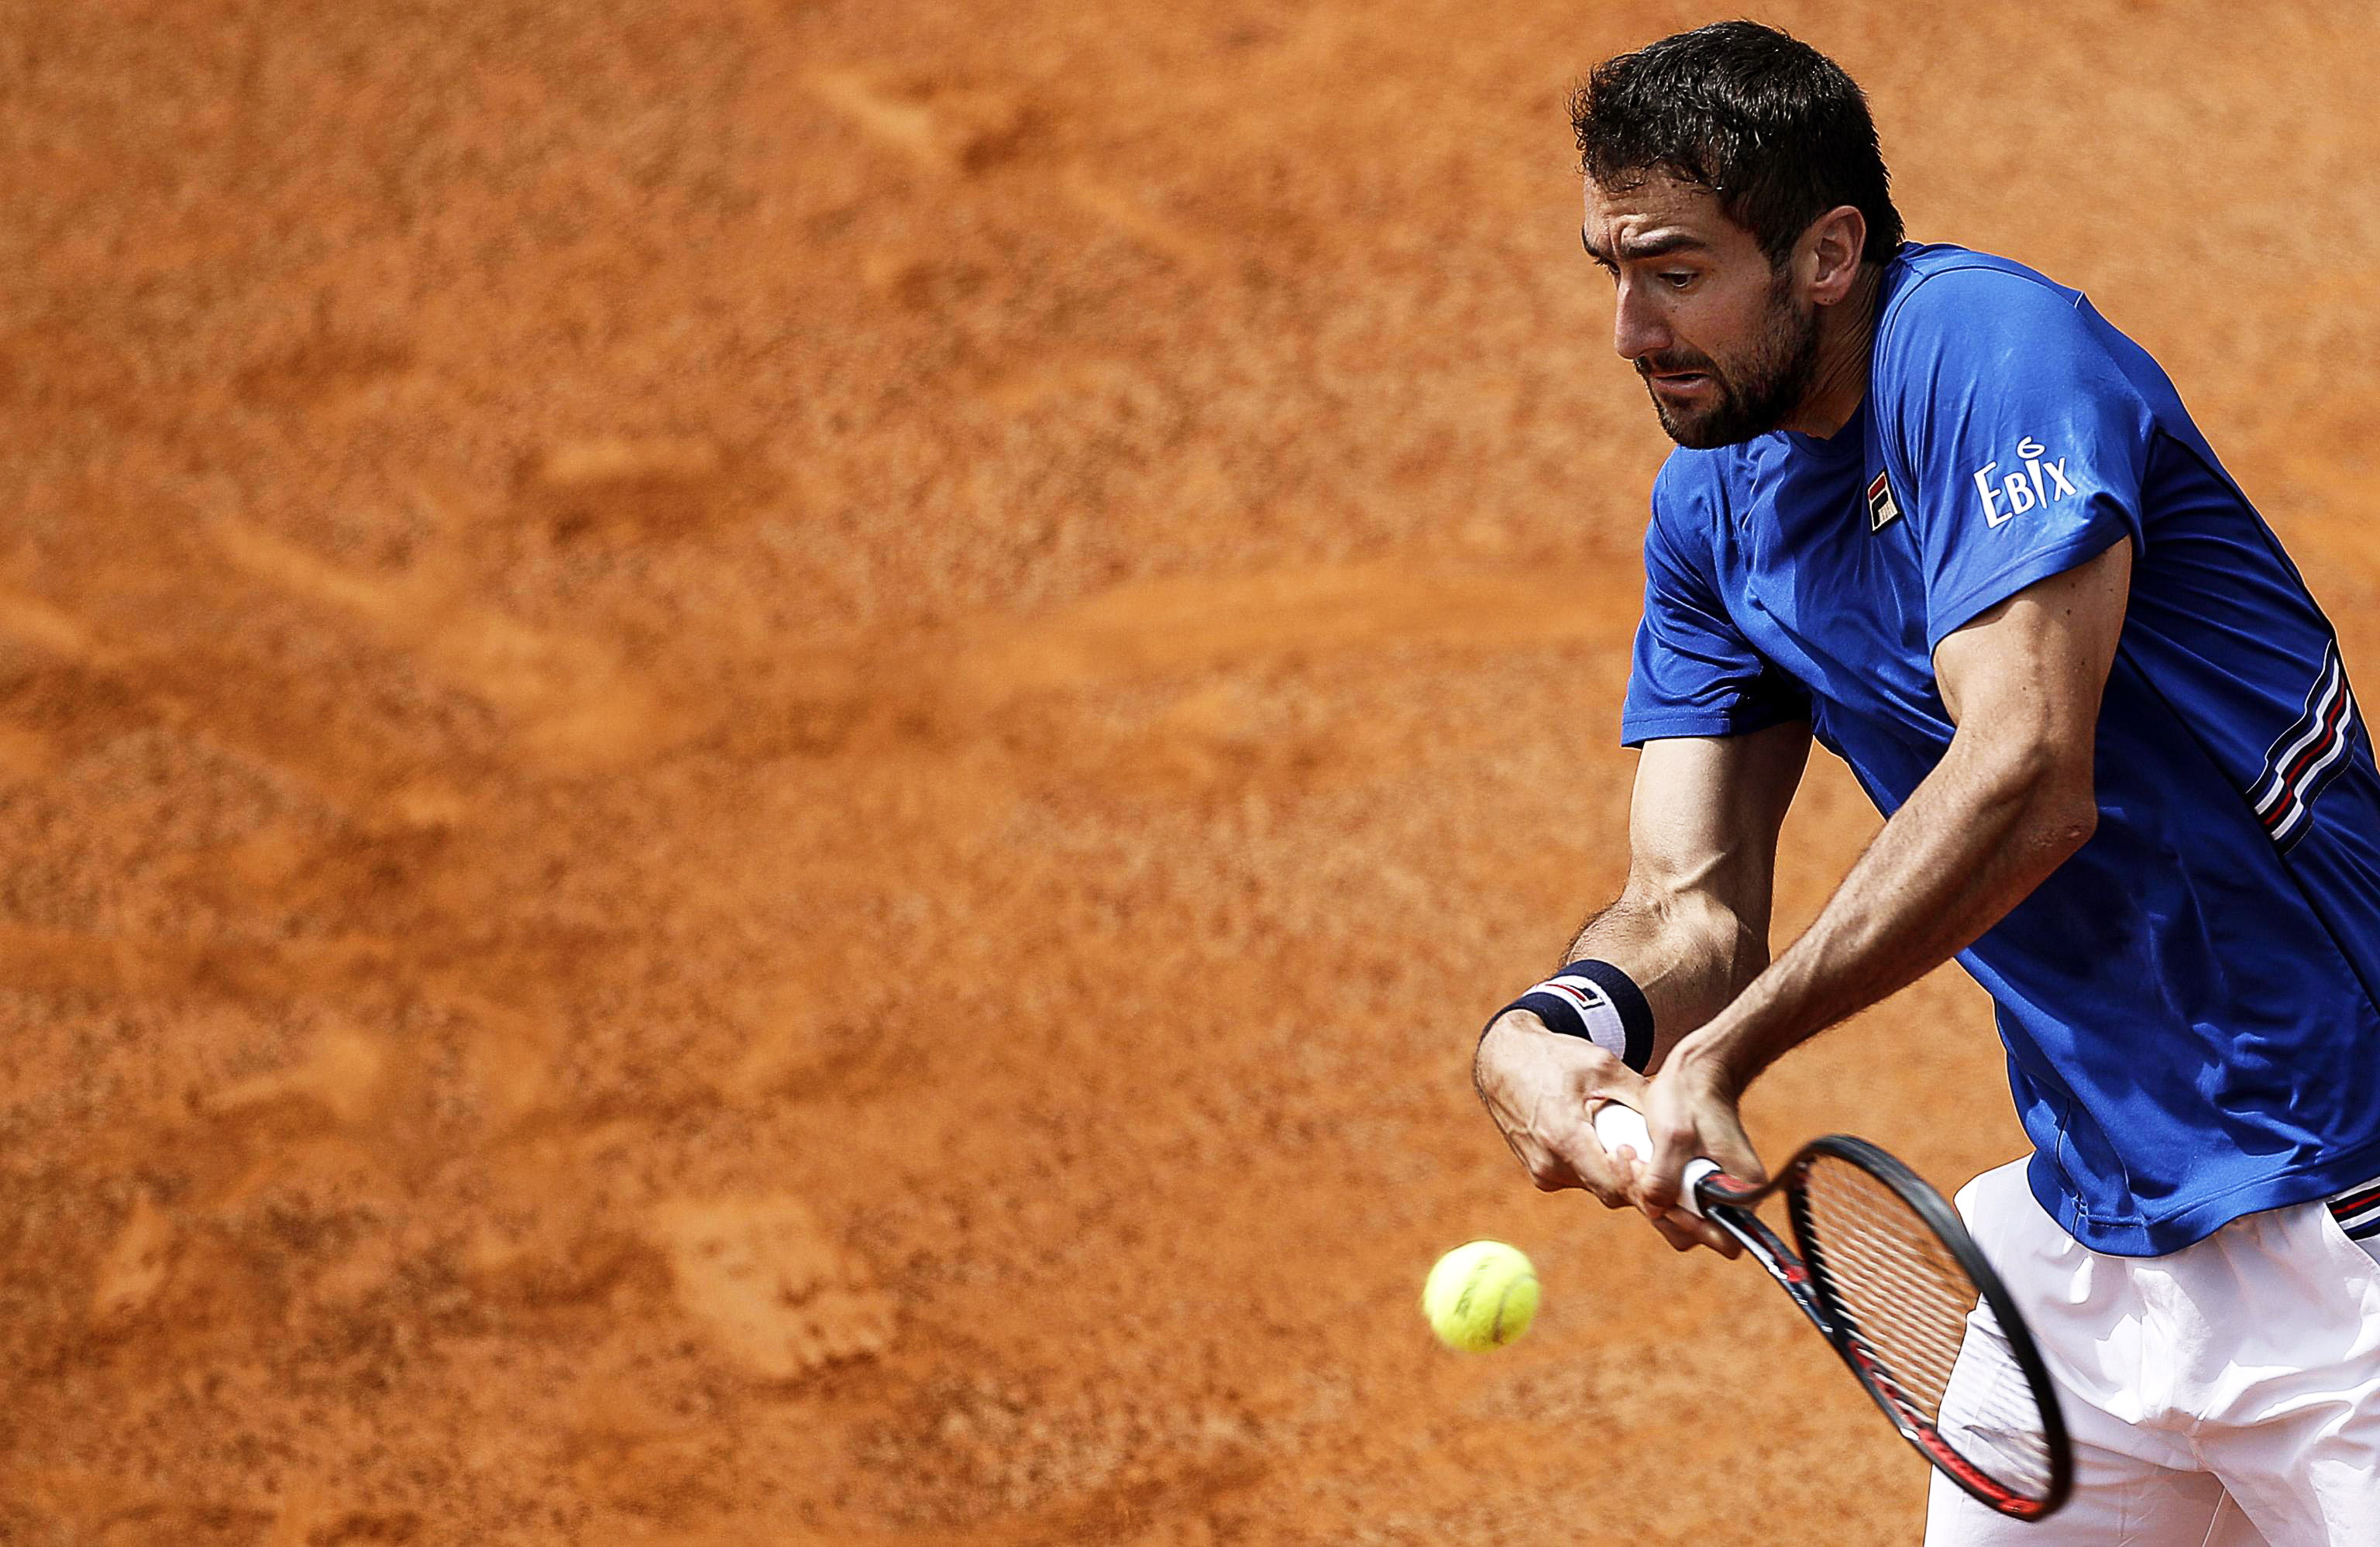 epa07569878 Marin Cilic of Croatia in action against Andrea Basso of Italy during their men's singles first round match at the Italian Open tennis tournament in Rome, Italy, 14 May 2019.  EPA/RICCARDO ANTIMIANI